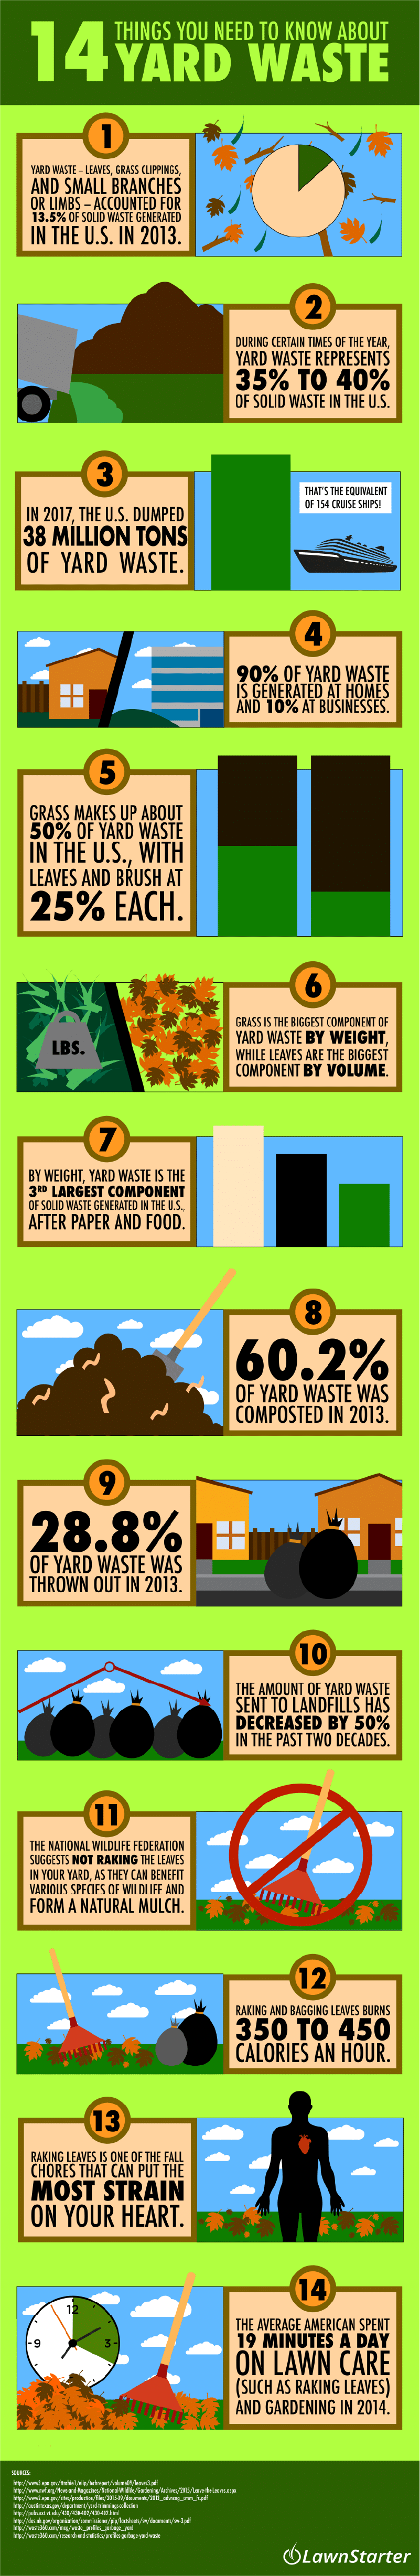 14 Things You Need to Know About Yard Waste